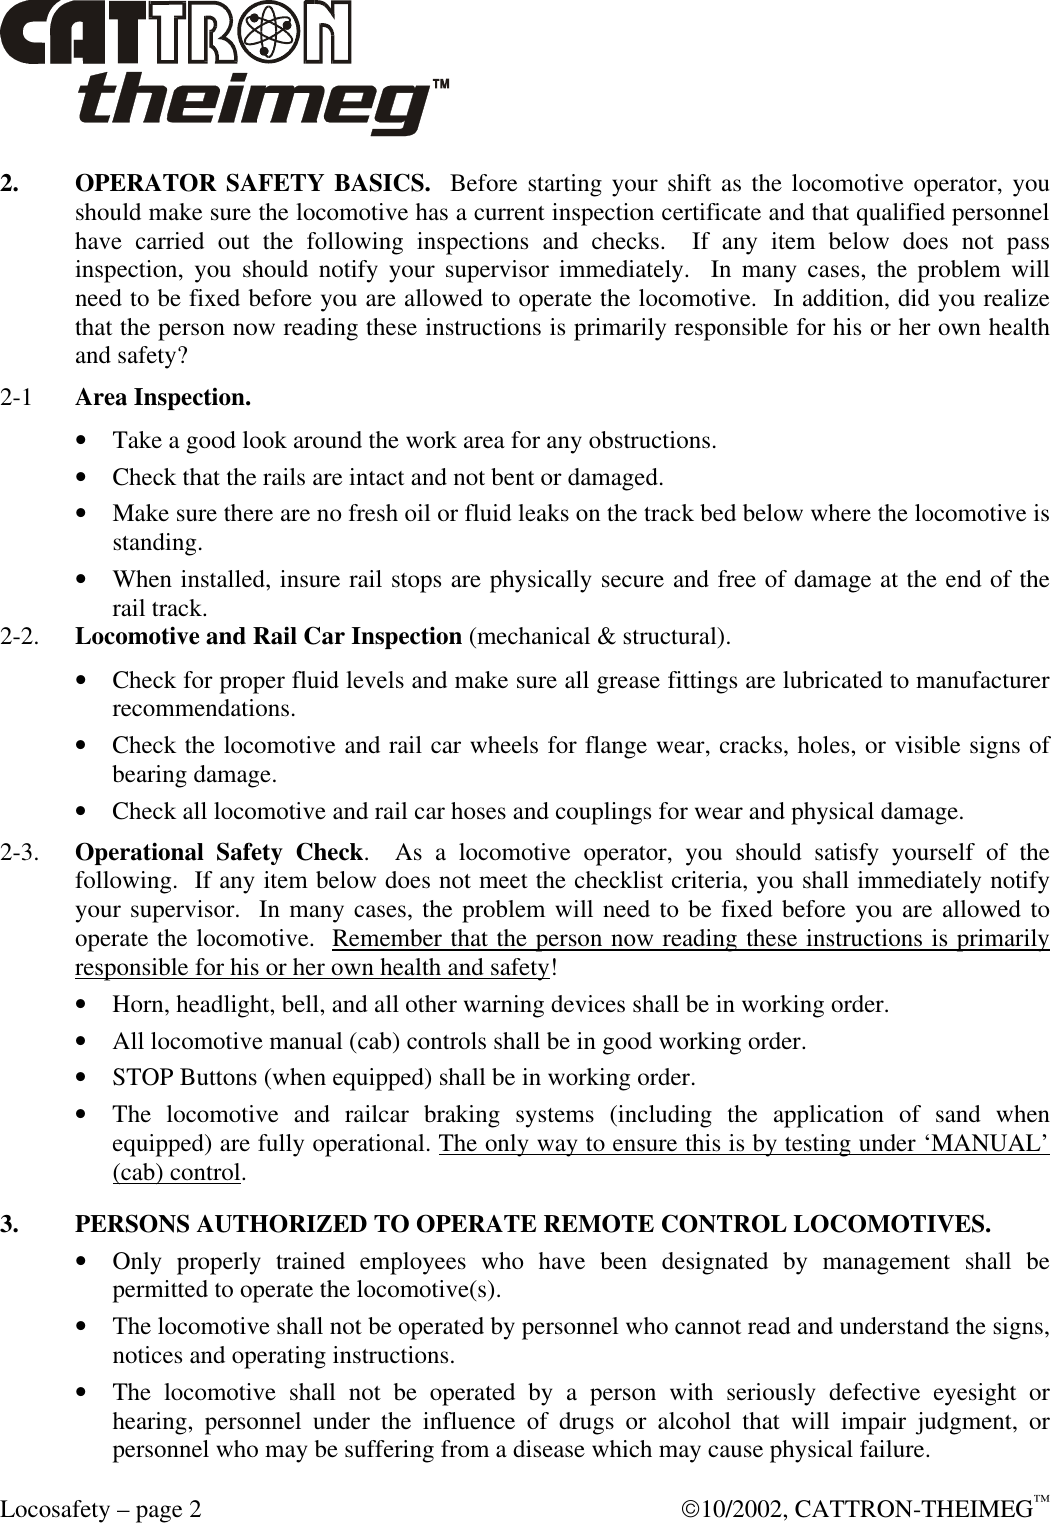  Locosafety – page 2  10/2002, CATTRON-THEIMEG™ 2. OPERATOR SAFETY BASICS.  Before starting your shift as the locomotive operator, you should make sure the locomotive has a current inspection certificate and that qualified personnel have carried out the following inspections and checks.  If any item below does not pass inspection, you should notify your supervisor immediately.  In many cases, the problem will need to be fixed before you are allowed to operate the locomotive.  In addition, did you realize that the person now reading these instructions is primarily responsible for his or her own health and safety? 2-1 Area Inspection.  • Take a good look around the work area for any obstructions. • Check that the rails are intact and not bent or damaged.  • Make sure there are no fresh oil or fluid leaks on the track bed below where the locomotive is standing. • When installed, insure rail stops are physically secure and free of damage at the end of the rail track.  2-2. Locomotive and Rail Car Inspection (mechanical &amp; structural). • Check for proper fluid levels and make sure all grease fittings are lubricated to manufacturer recommendations.  • Check the locomotive and rail car wheels for flange wear, cracks, holes, or visible signs of bearing damage. • Check all locomotive and rail car hoses and couplings for wear and physical damage.  2-3. Operational Safety Check.  As a locomotive operator, you should satisfy yourself of the following.  If any item below does not meet the checklist criteria, you shall immediately notify your supervisor.  In many cases, the problem will need to be fixed before you are allowed to operate the locomotive.  Remember that the person now reading these instructions is primarily responsible for his or her own health and safety! • Horn, headlight, bell, and all other warning devices shall be in working order. • All locomotive manual (cab) controls shall be in good working order. • STOP Buttons (when equipped) shall be in working order.  • The locomotive and railcar braking systems (including the application of sand when equipped) are fully operational. The only way to ensure this is by testing under ‘MANUAL’ (cab) control.  3. PERSONS AUTHORIZED TO OPERATE REMOTE CONTROL LOCOMOTIVES. • Only properly trained employees who have been designated by management shall be permitted to operate the locomotive(s). • The locomotive shall not be operated by personnel who cannot read and understand the signs, notices and operating instructions. • The locomotive shall not be operated by a person with seriously defective eyesight or hearing, personnel under the influence of drugs or alcohol that will impair judgment, or personnel who may be suffering from a disease which may cause physical failure. 